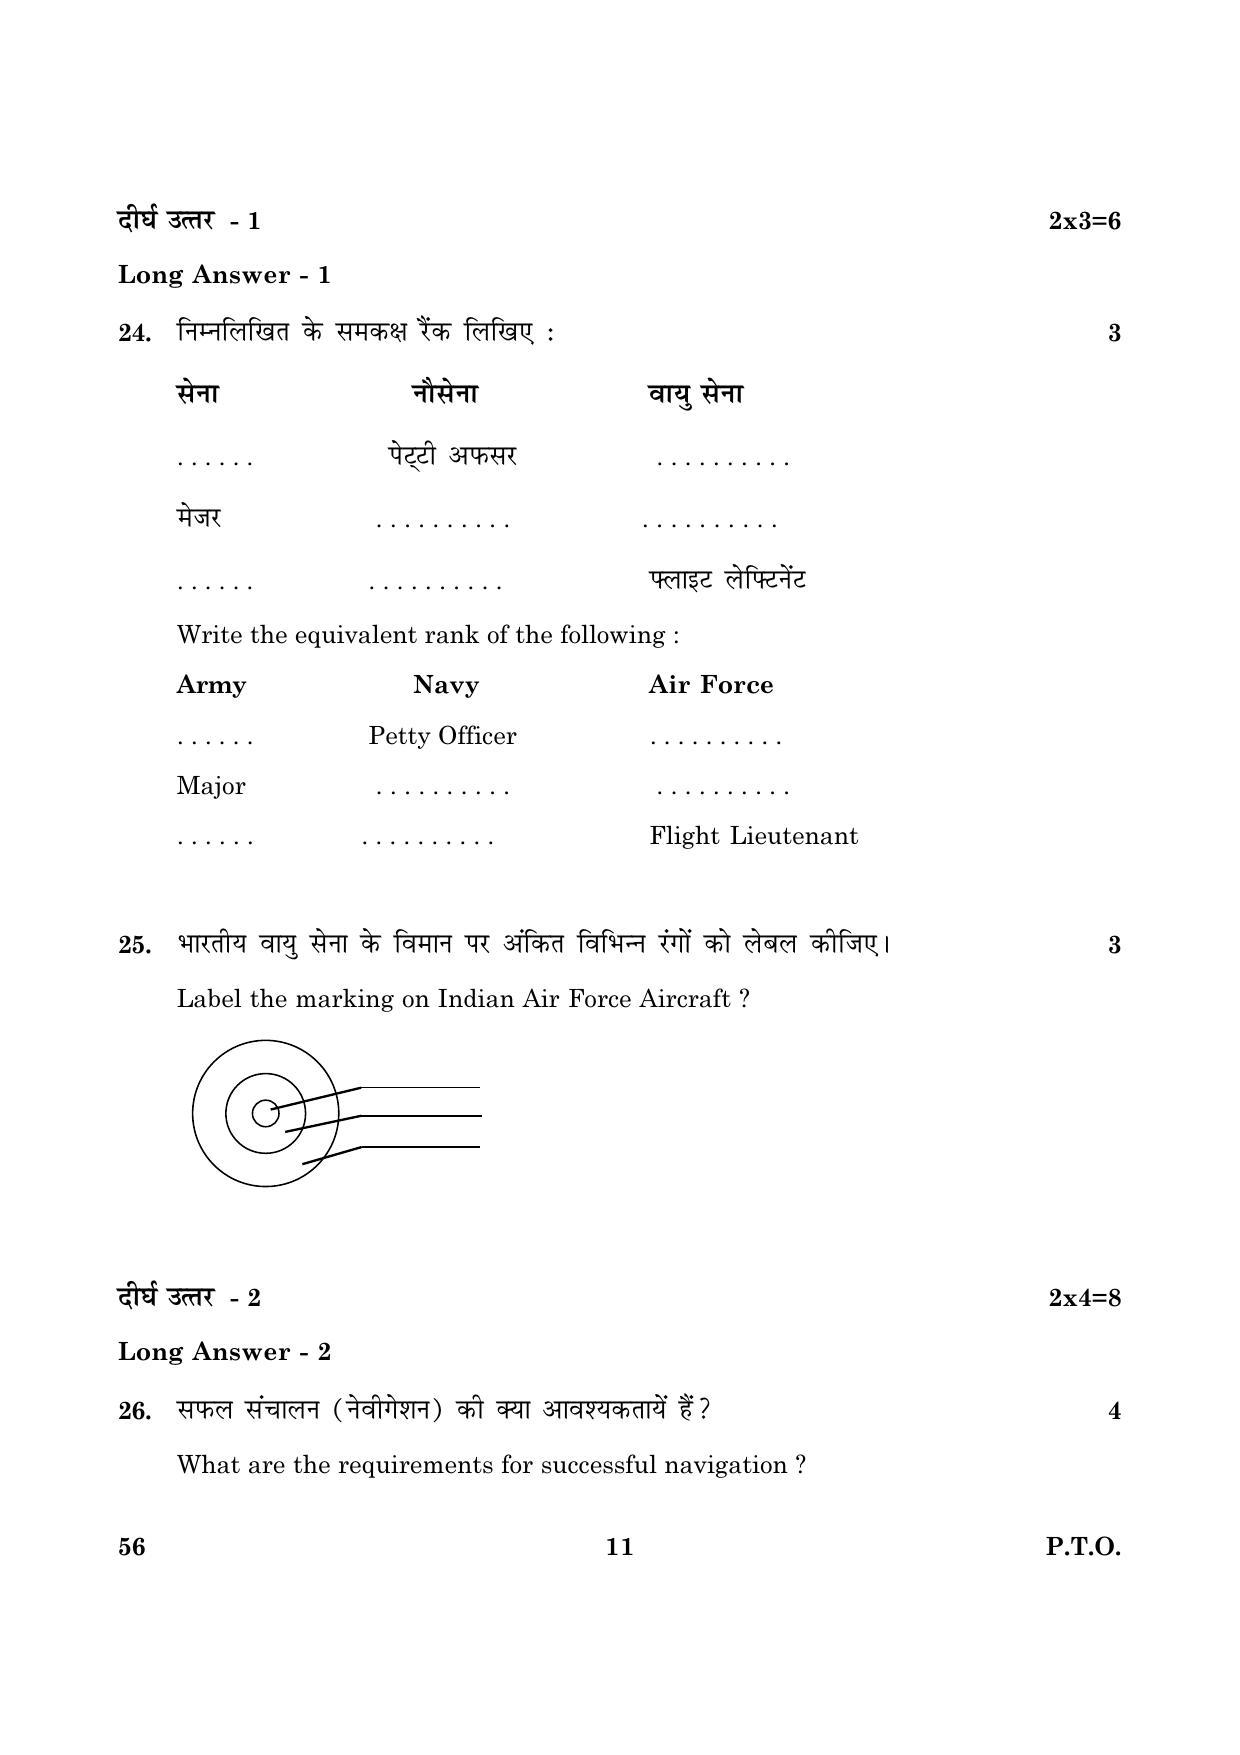 CBSE Class 10 056 National Cadet Corps 2016 Question Paper - Page 11